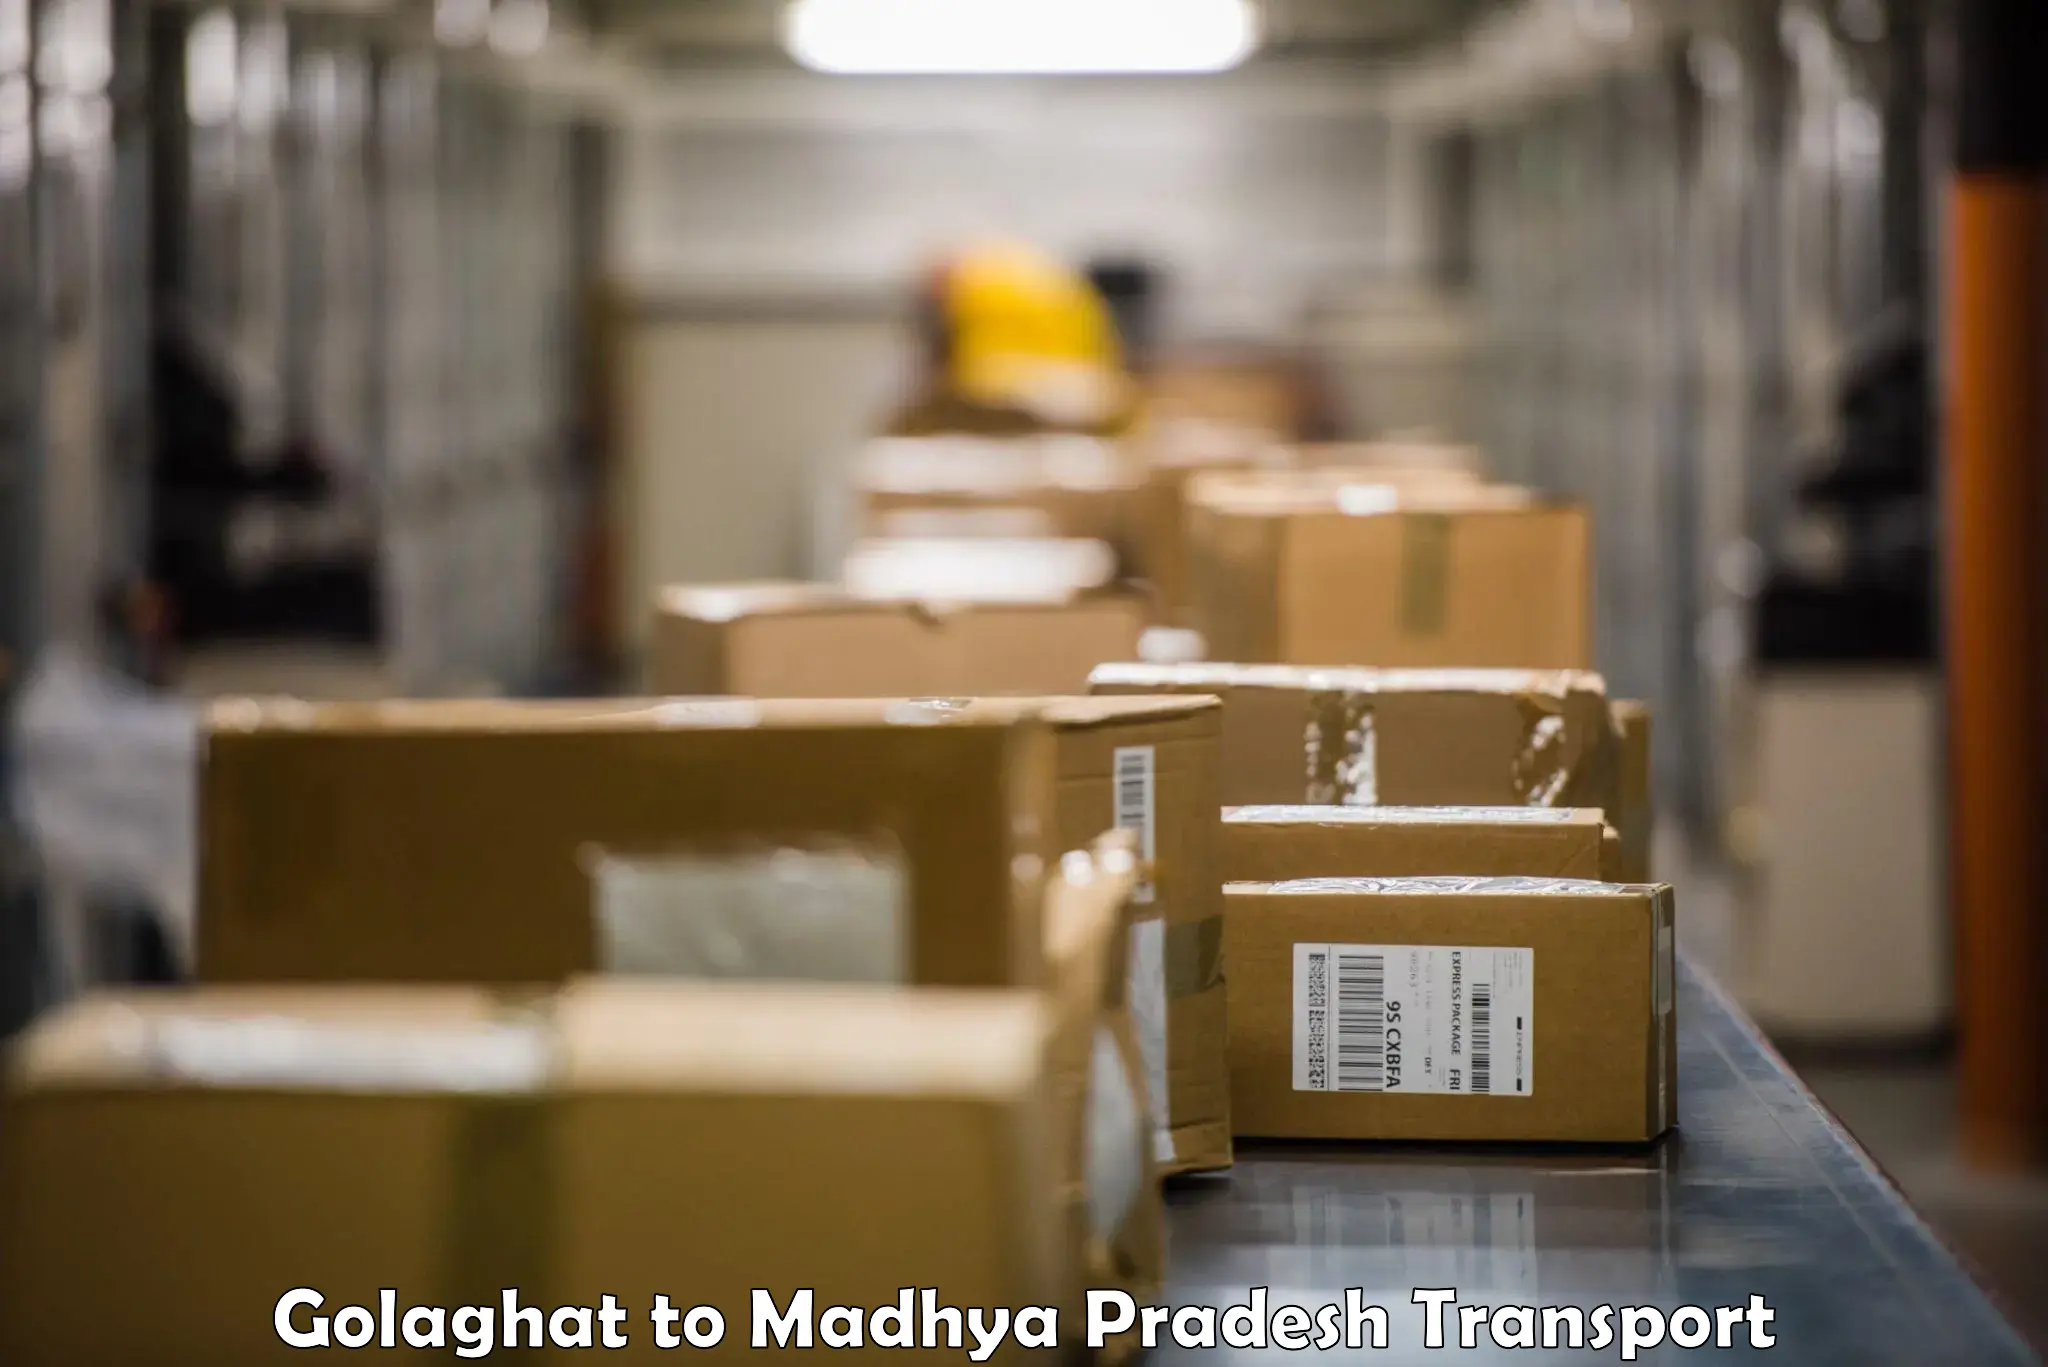 Daily parcel service transport Golaghat to Chand Chaurai